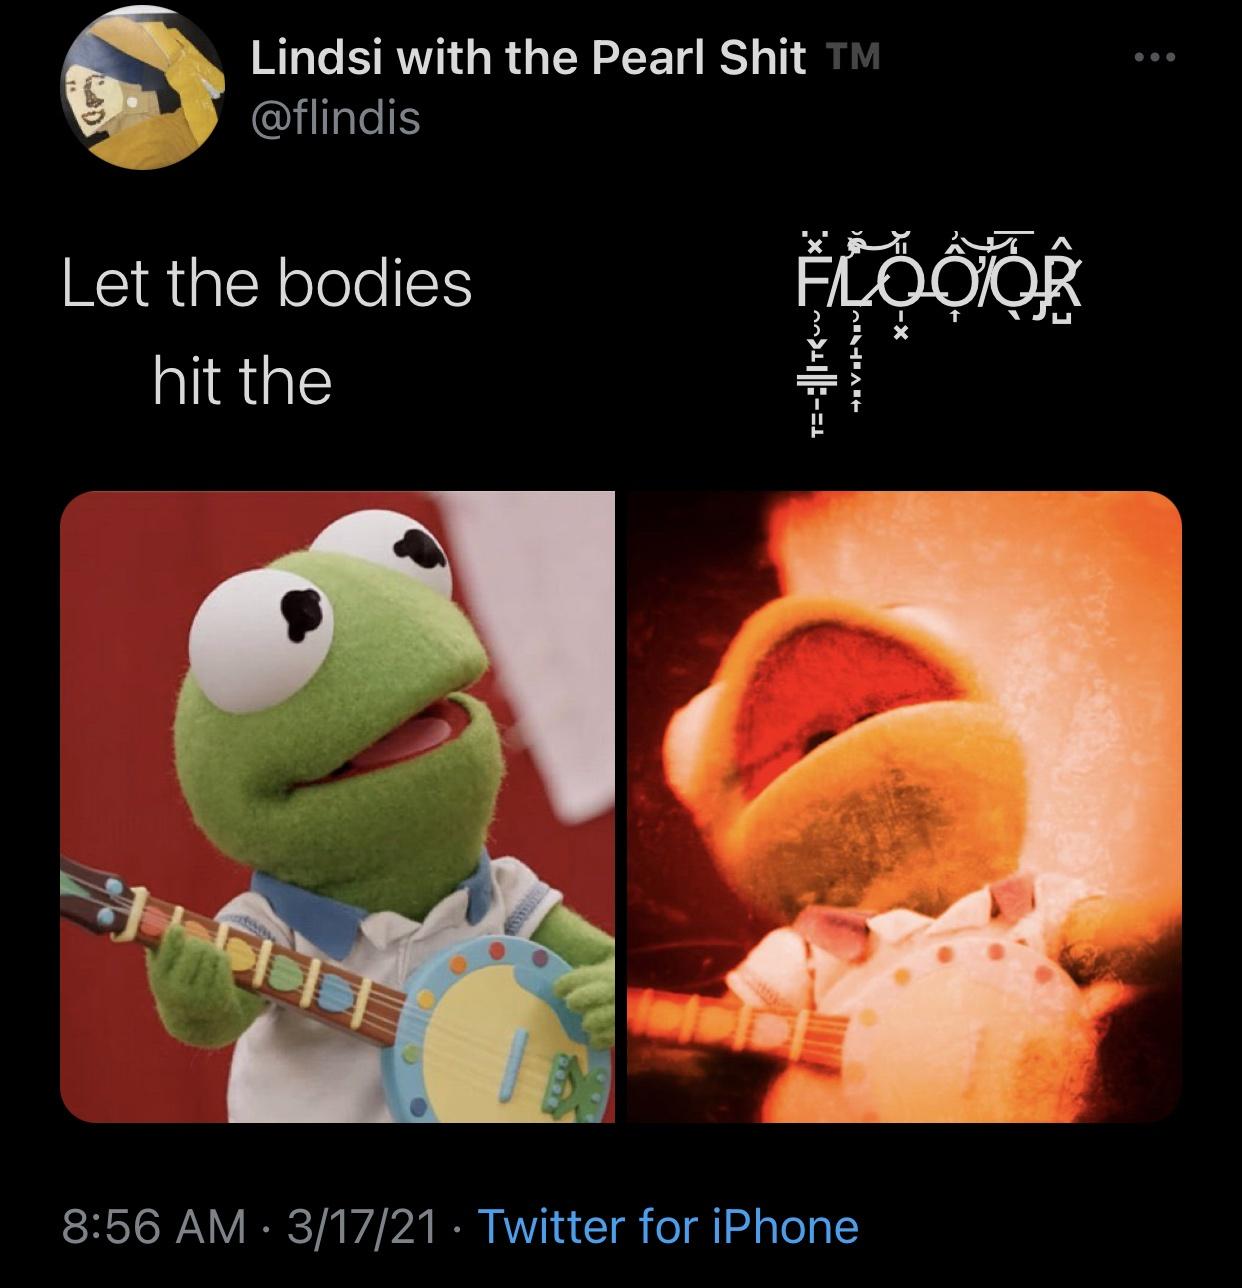 photo caption - Lindsi with the Pearl Shit Tm Let the bodies hit the TITTx Ve 31721 Twitter for iPhone